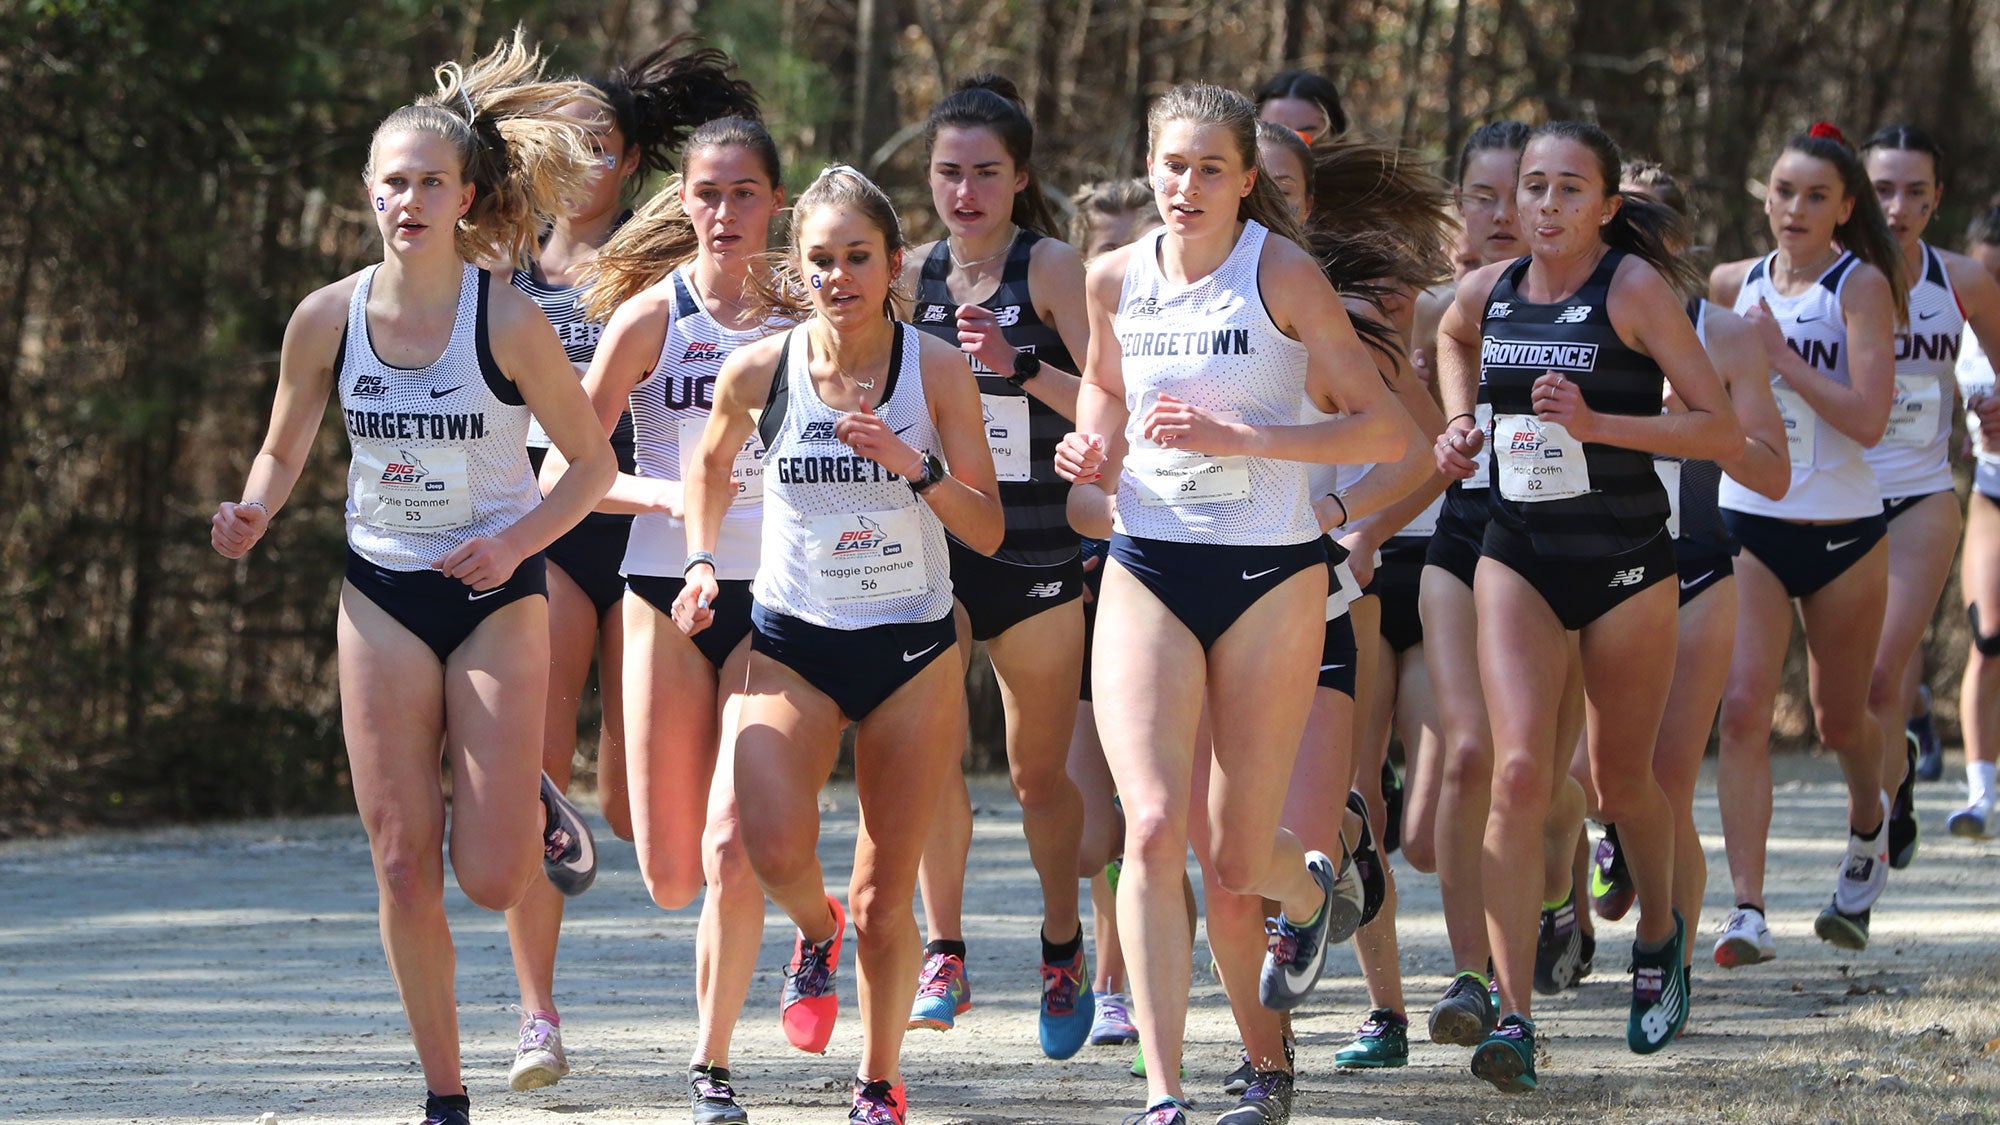 Next Stop, NCAA Championships Women’s Cross Country Team Claims BIG